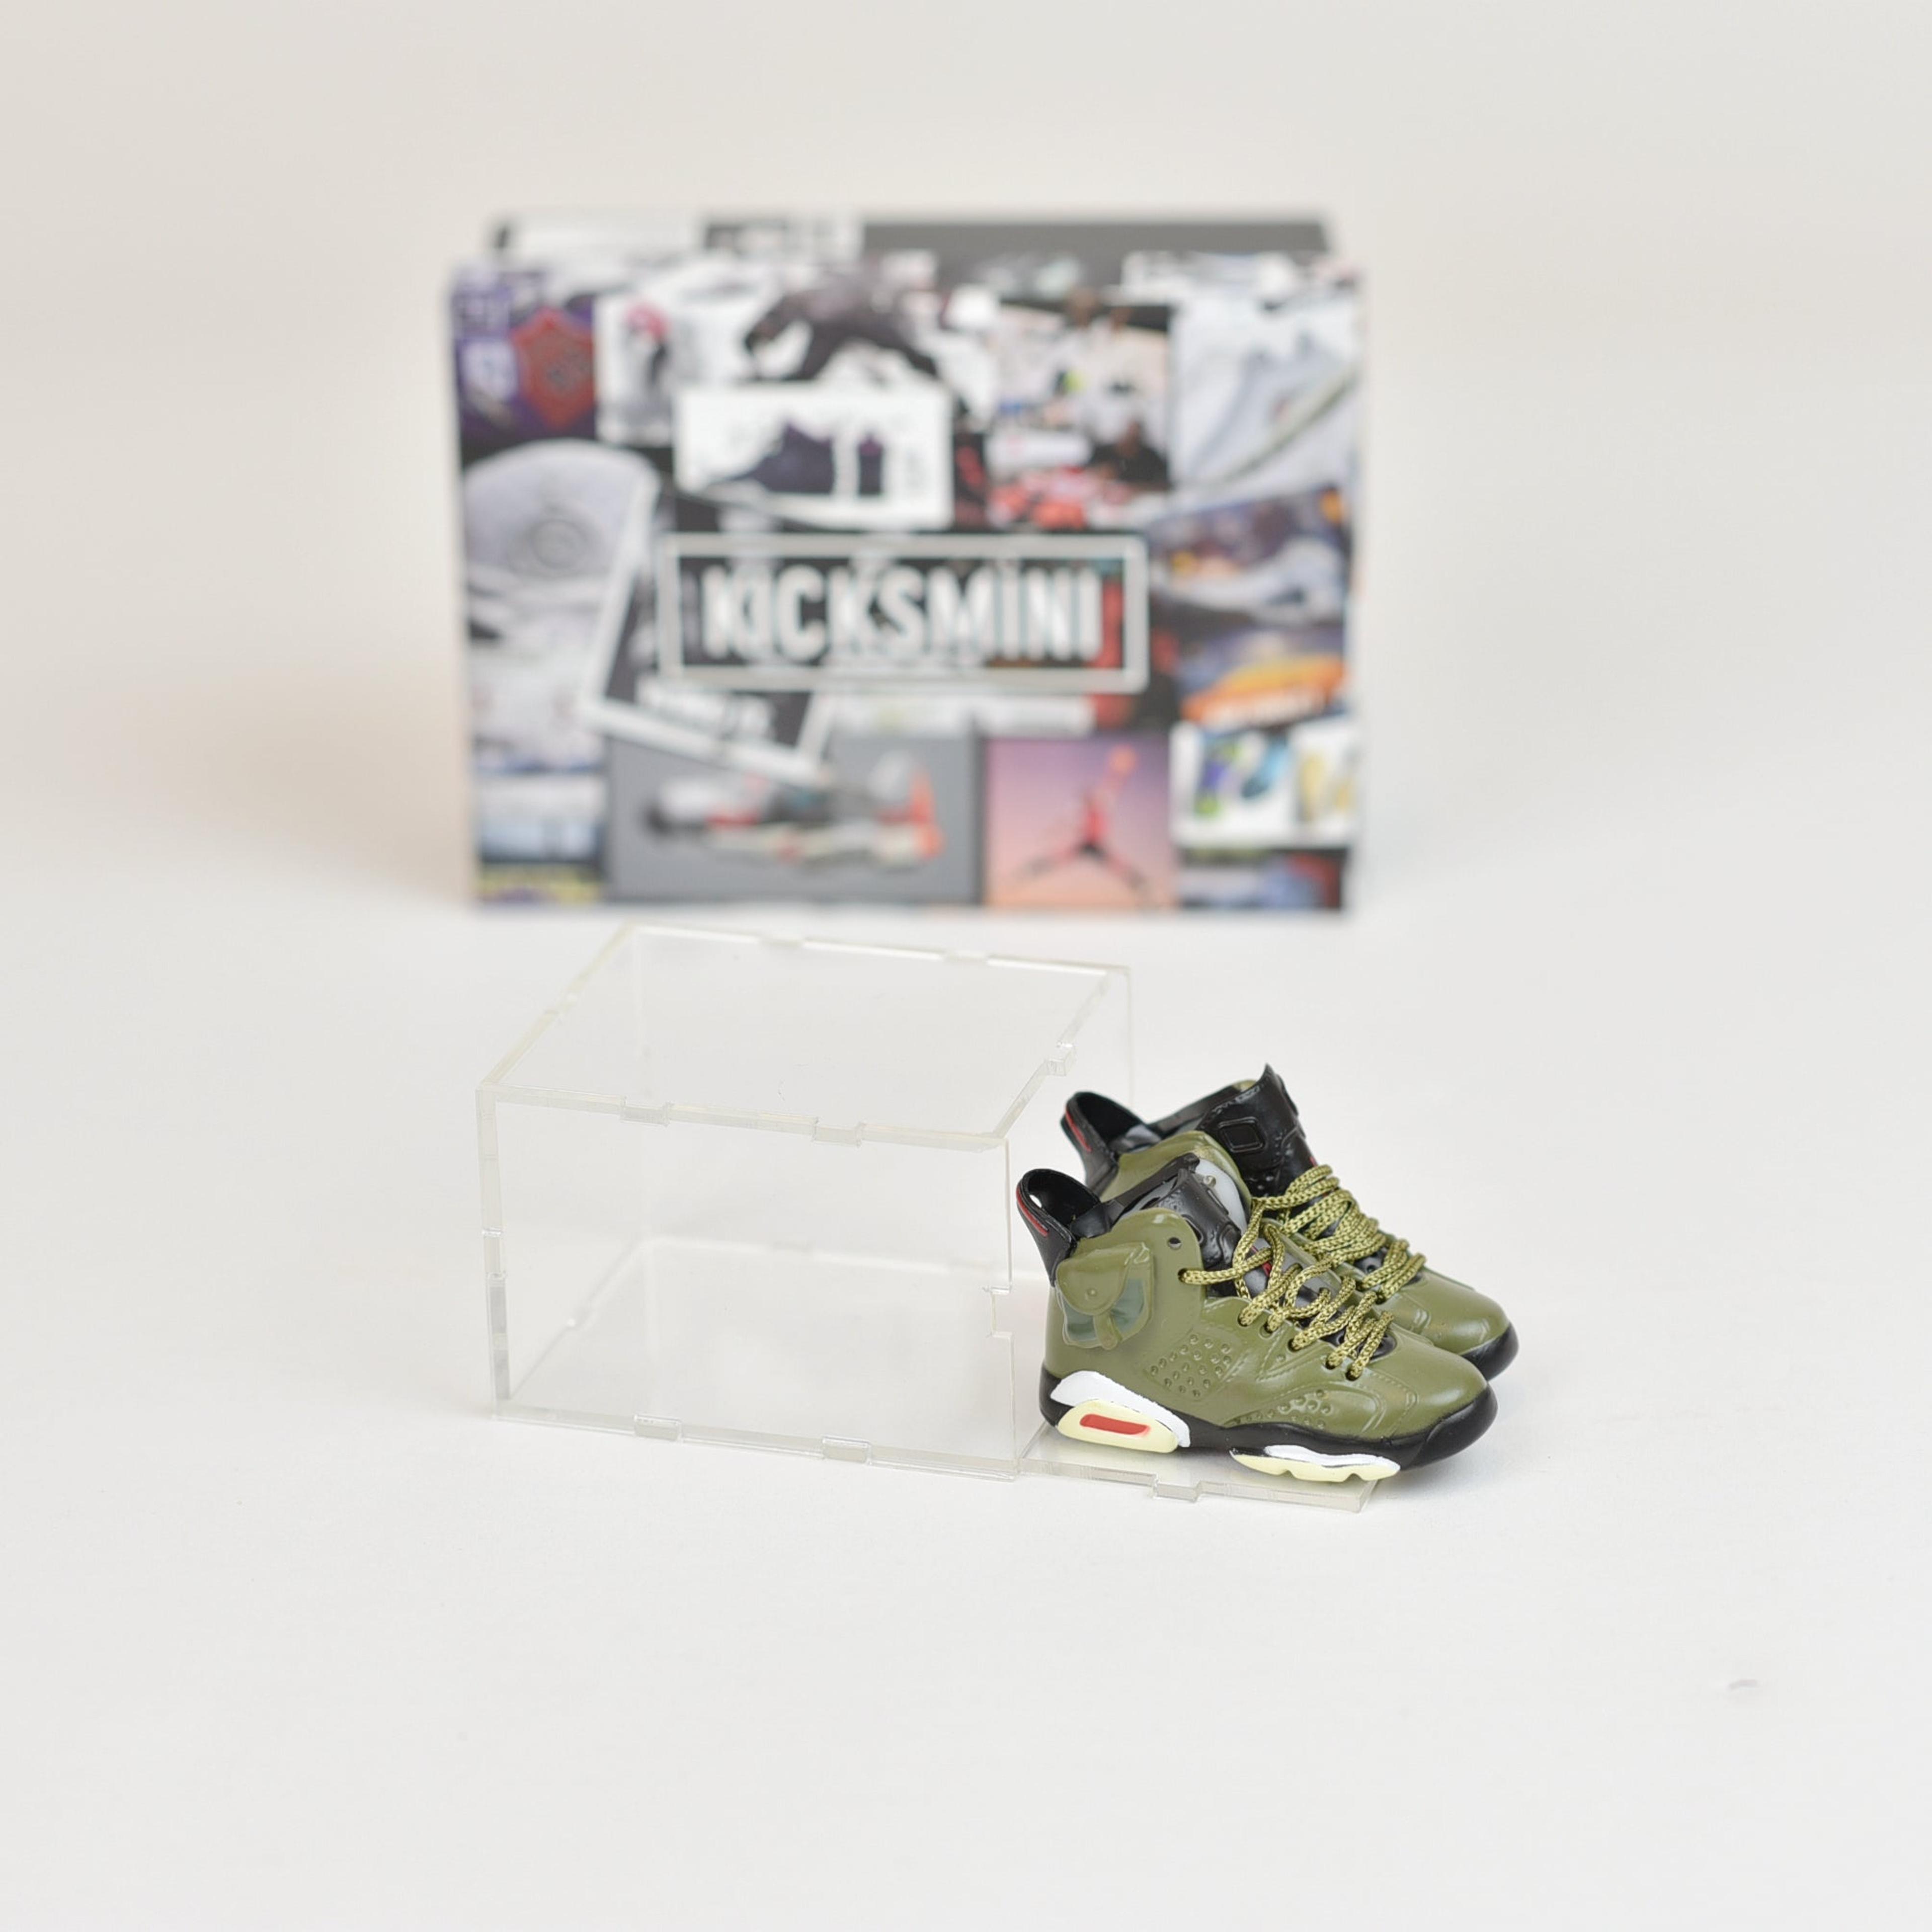 Alternate View 12 of Travis Scott Collaboration Mini Sneakers with Display Case